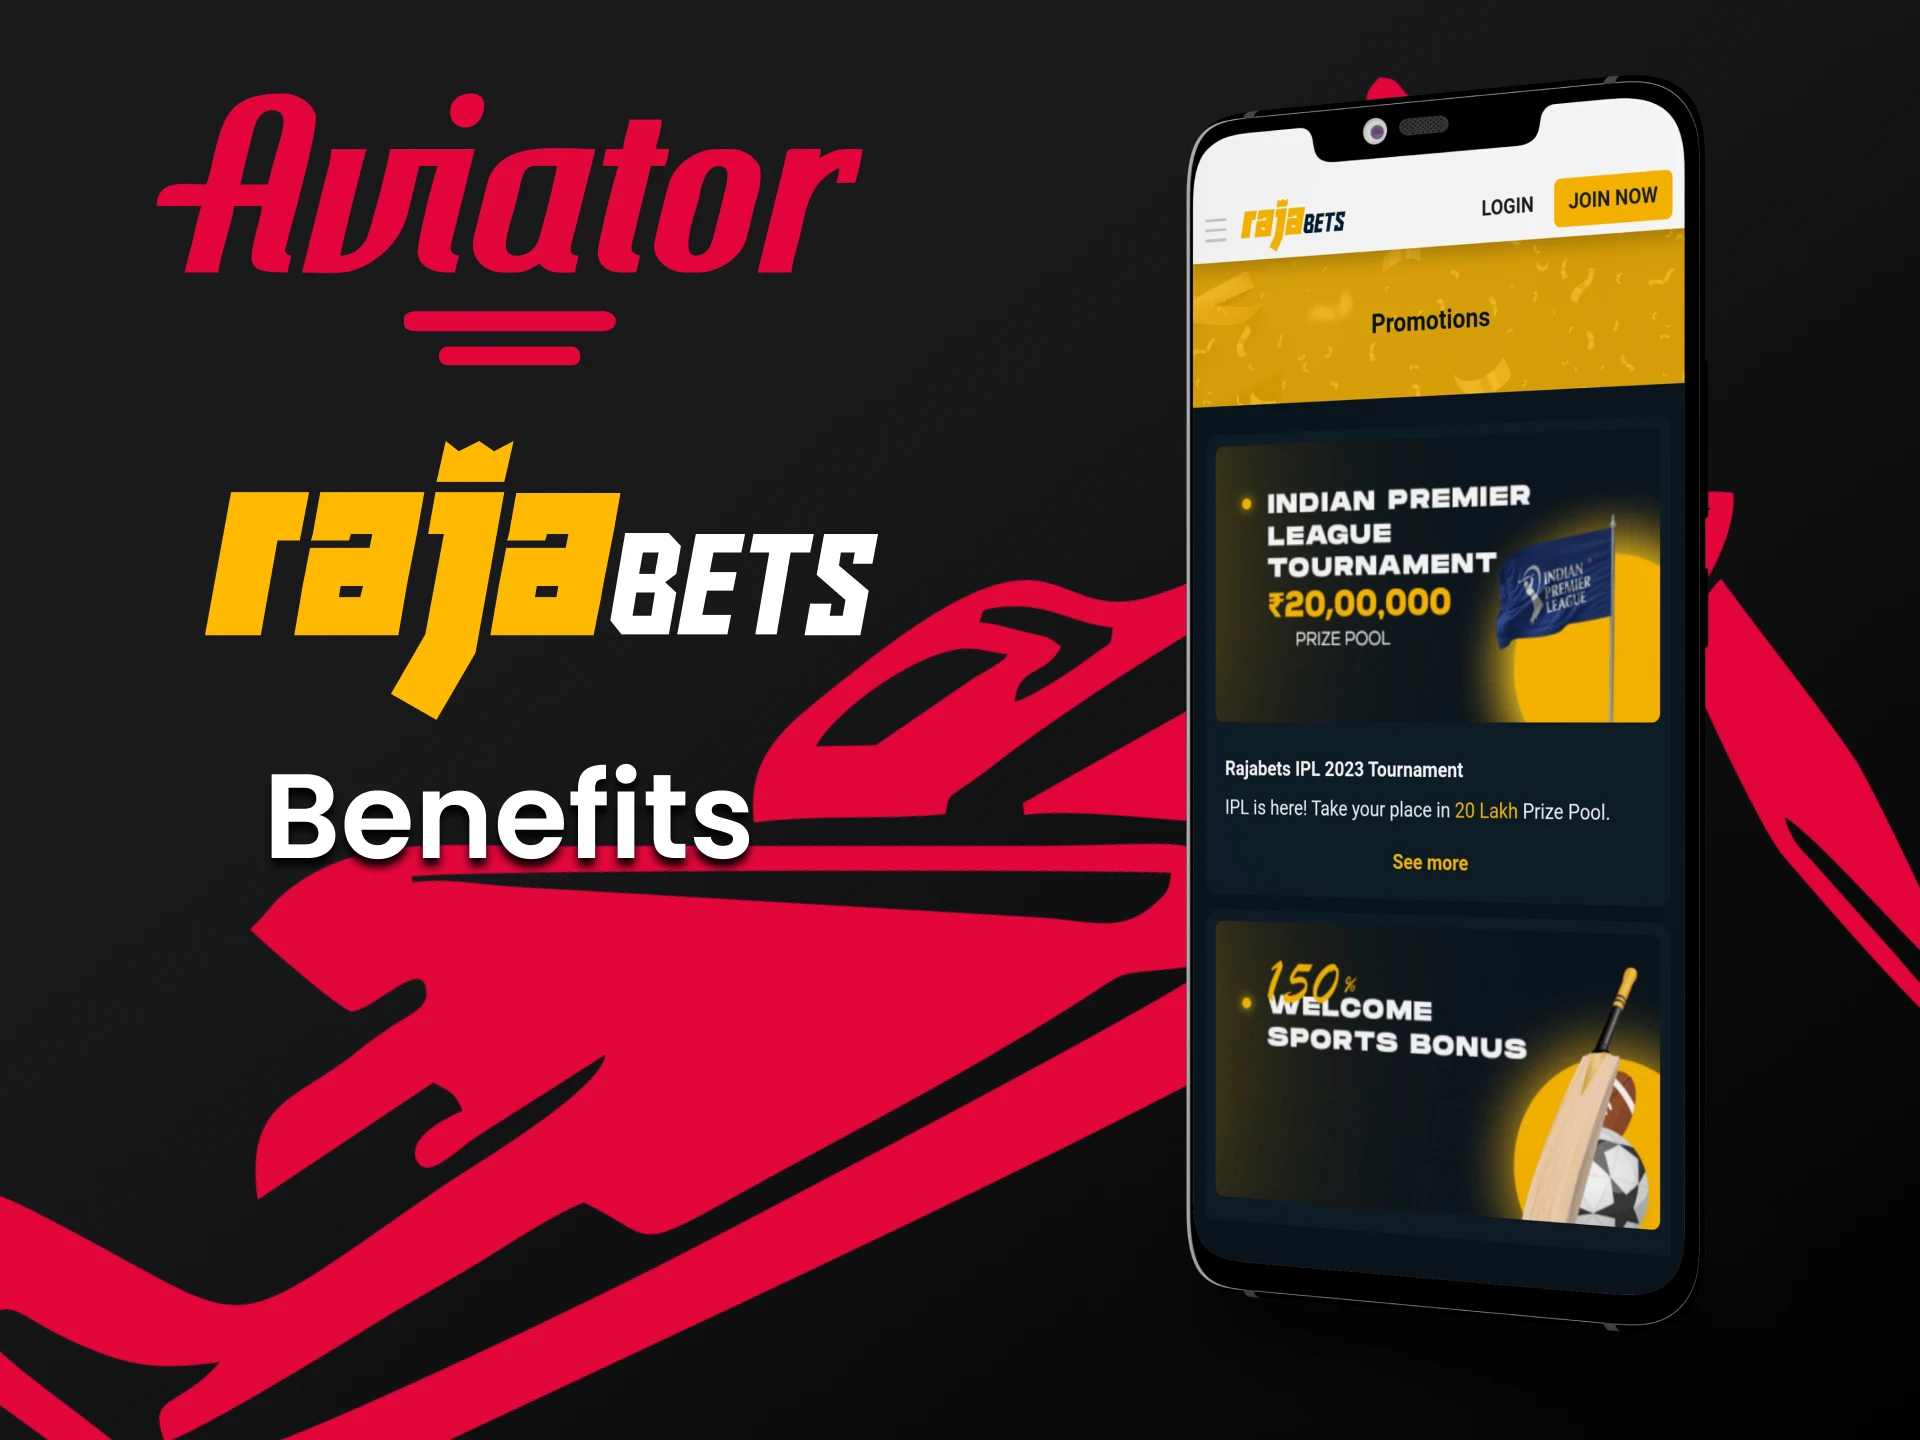 Find out what are the advantages of the Rajabets application for the game Aviator.